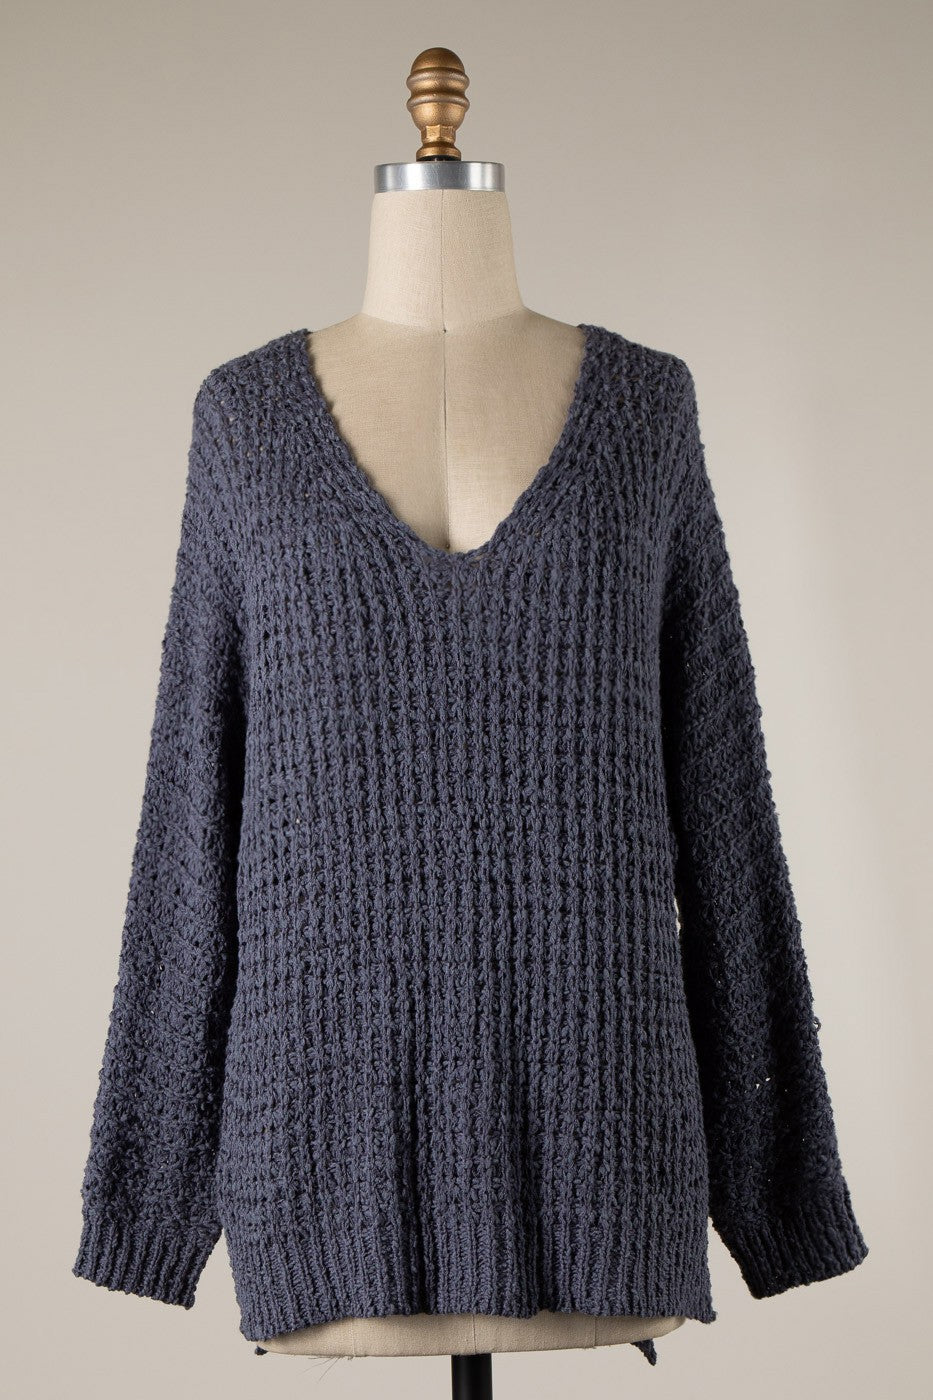 Vintage Cable Knit Sweater - Steel Blue